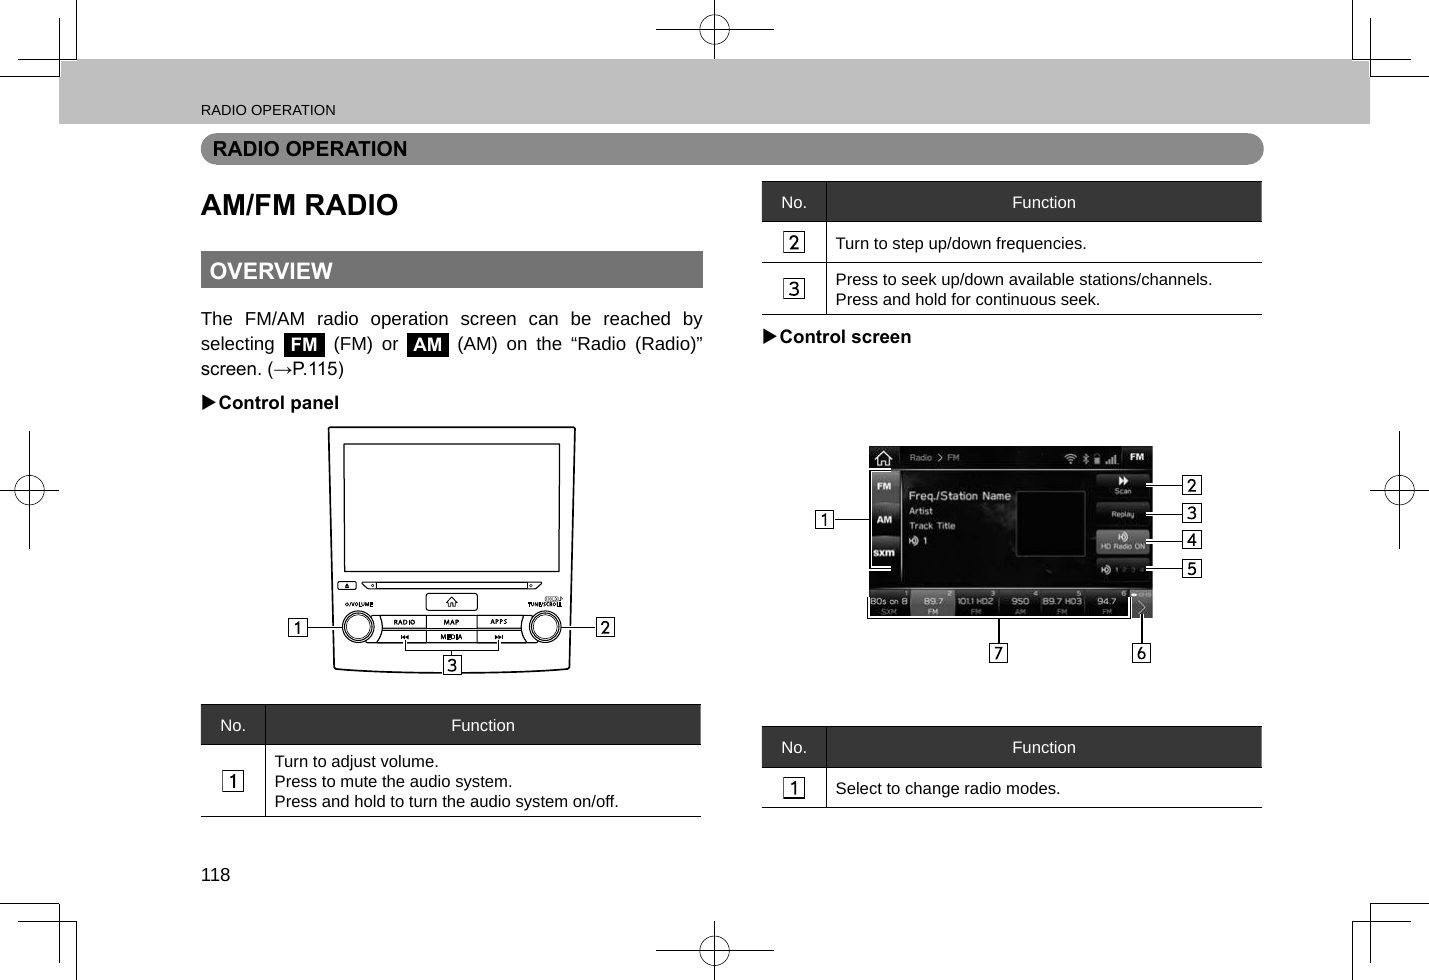 RADIO OPERATION118RADIO OPERATIONAM/FM RADIOOVERVIEWThe FM/AM radio operation screen can be reached by selecting FM (FM) or AM (AM) on the “Radio (Radio)” screen. (→P.115) XControl panelNo. FunctionTurn to adjust volume.Press to mute the audio system.Press and hold to turn the audio system on/off.No. FunctionTurn to step up/down frequencies.Press to seek up/down available stations/channels.Press and hold for continuous seek. XControl screenNo. FunctionSelect to change radio modes.